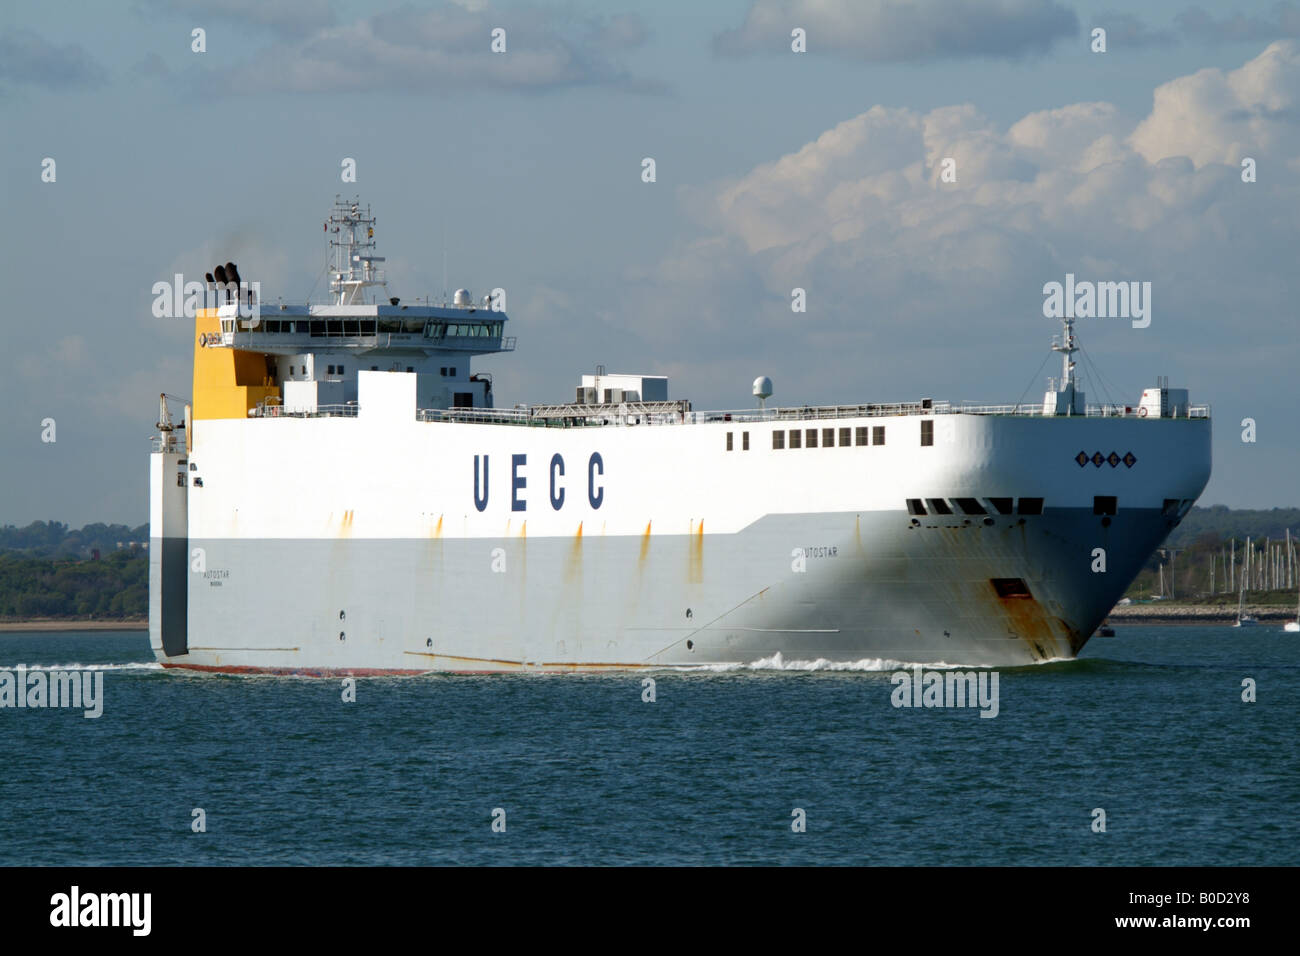 Autostar a RoRo car carrier ship underway on Southampton water England UK Owned by UECC United European Car Carriers Stock Photo